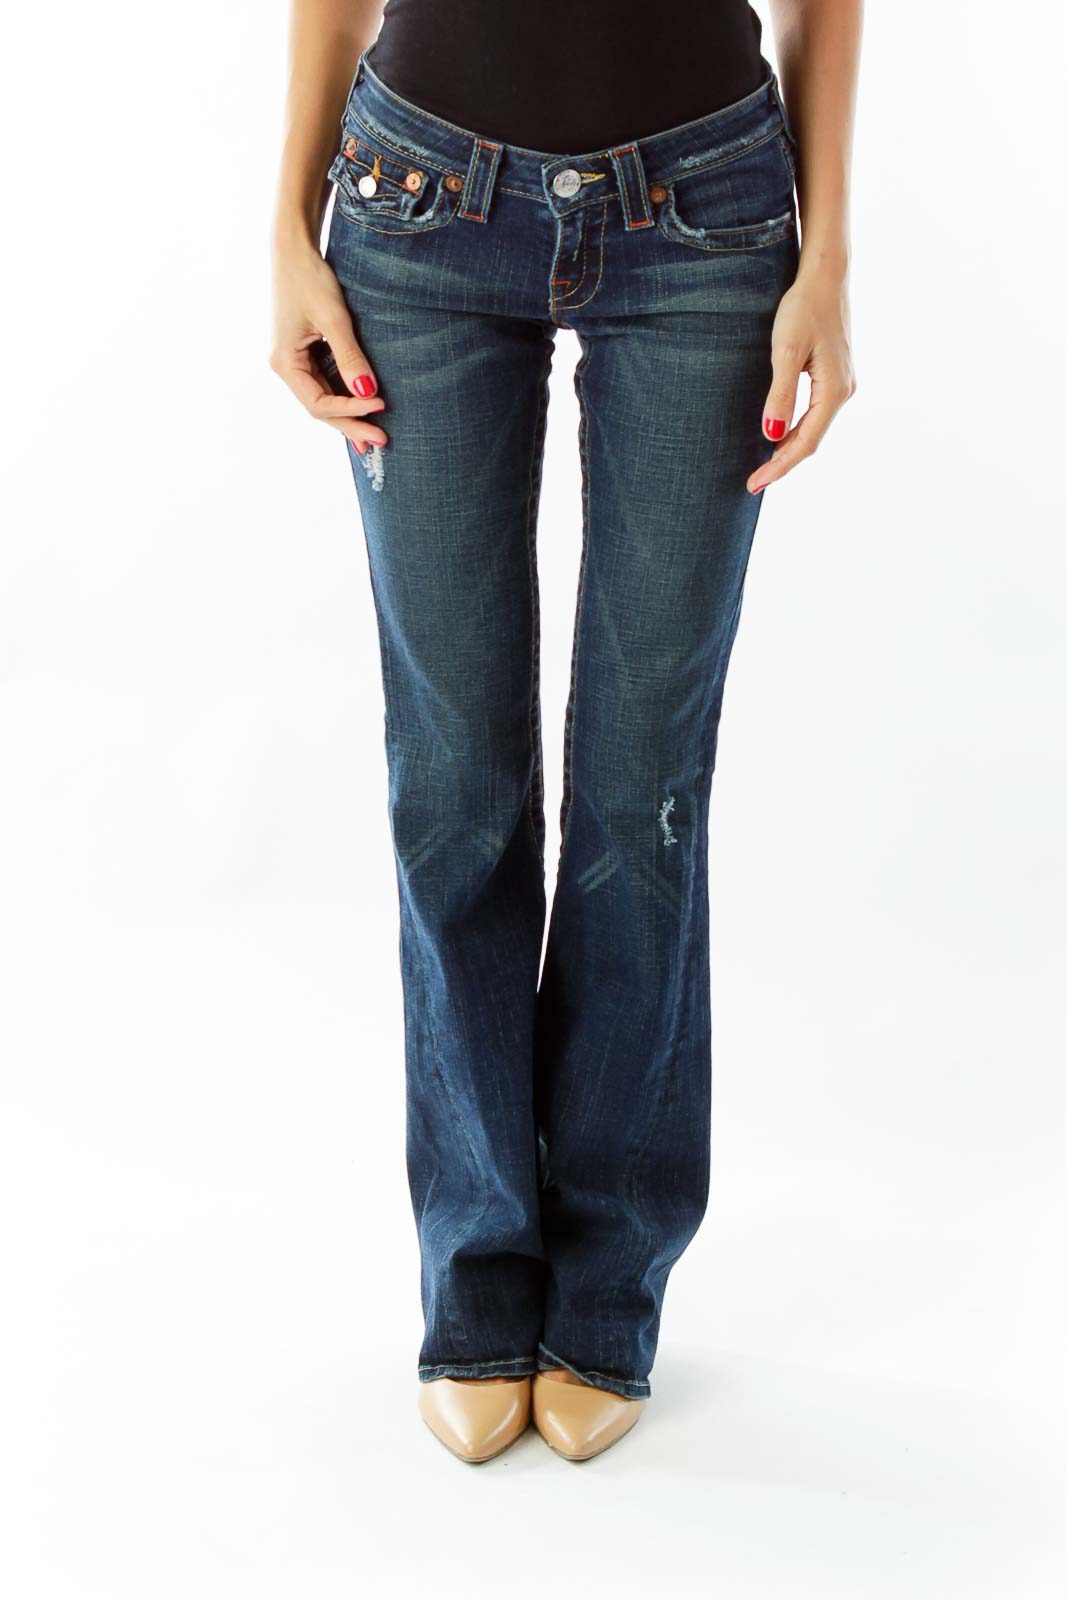 Blue Flare Bottom Jeans Front